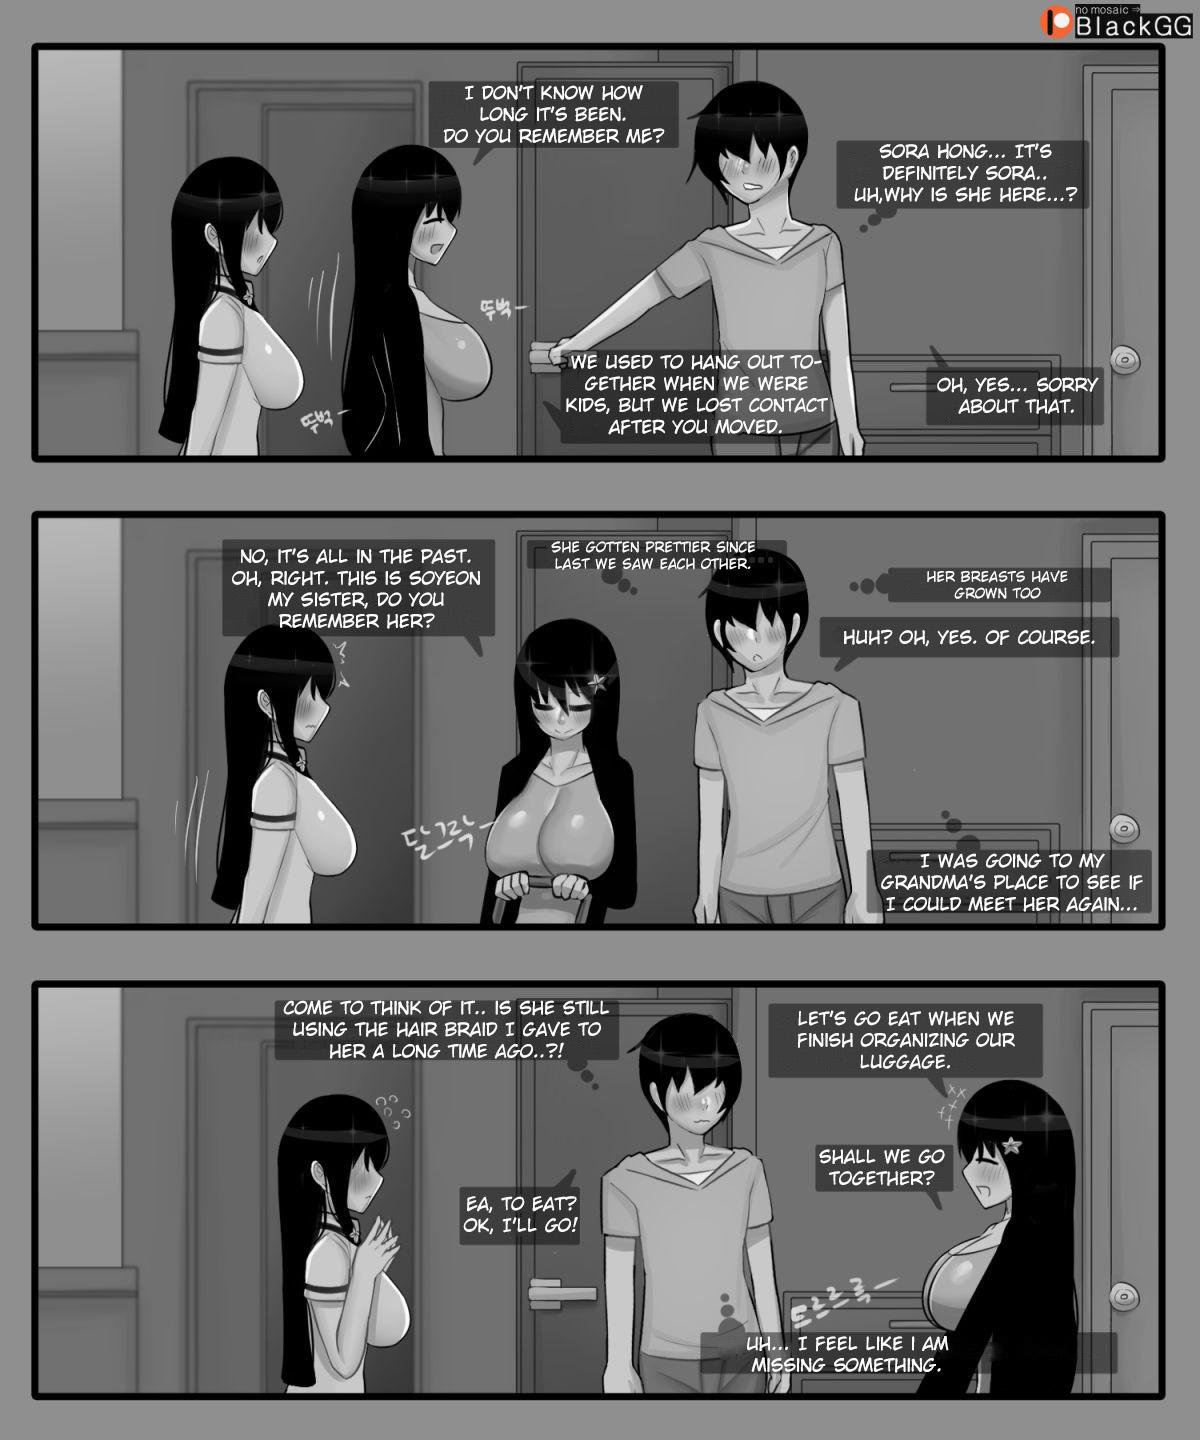 Dykes The story of a childhood friend becoming father's lover 1 - Original Scene - Page 7